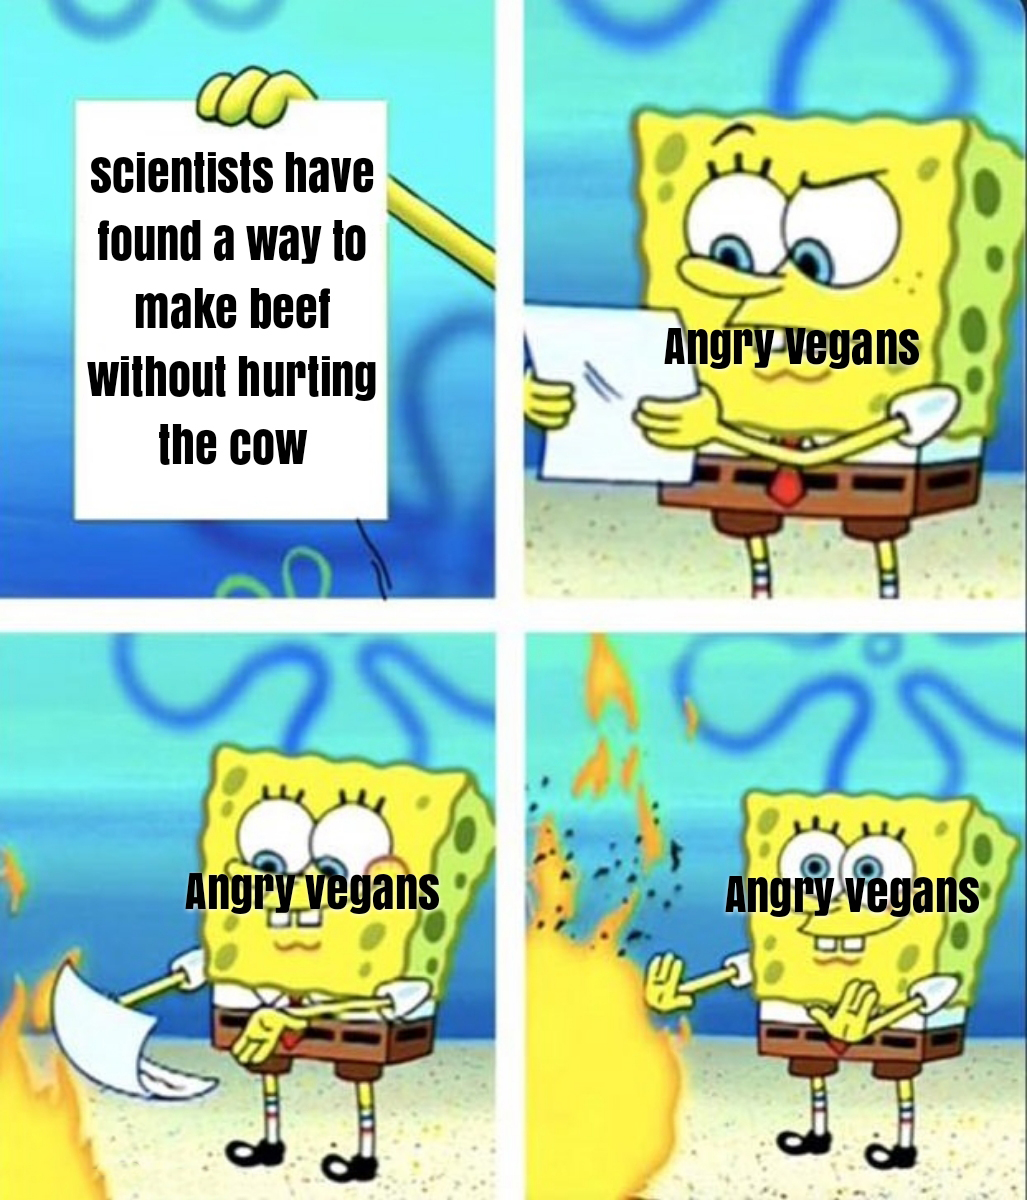 funny memes - dank memes - spongebob burn paper meme - scientists have found a way to make beef without hurting the cow Angry Vegans Hc Angry Vegans Angry vegans